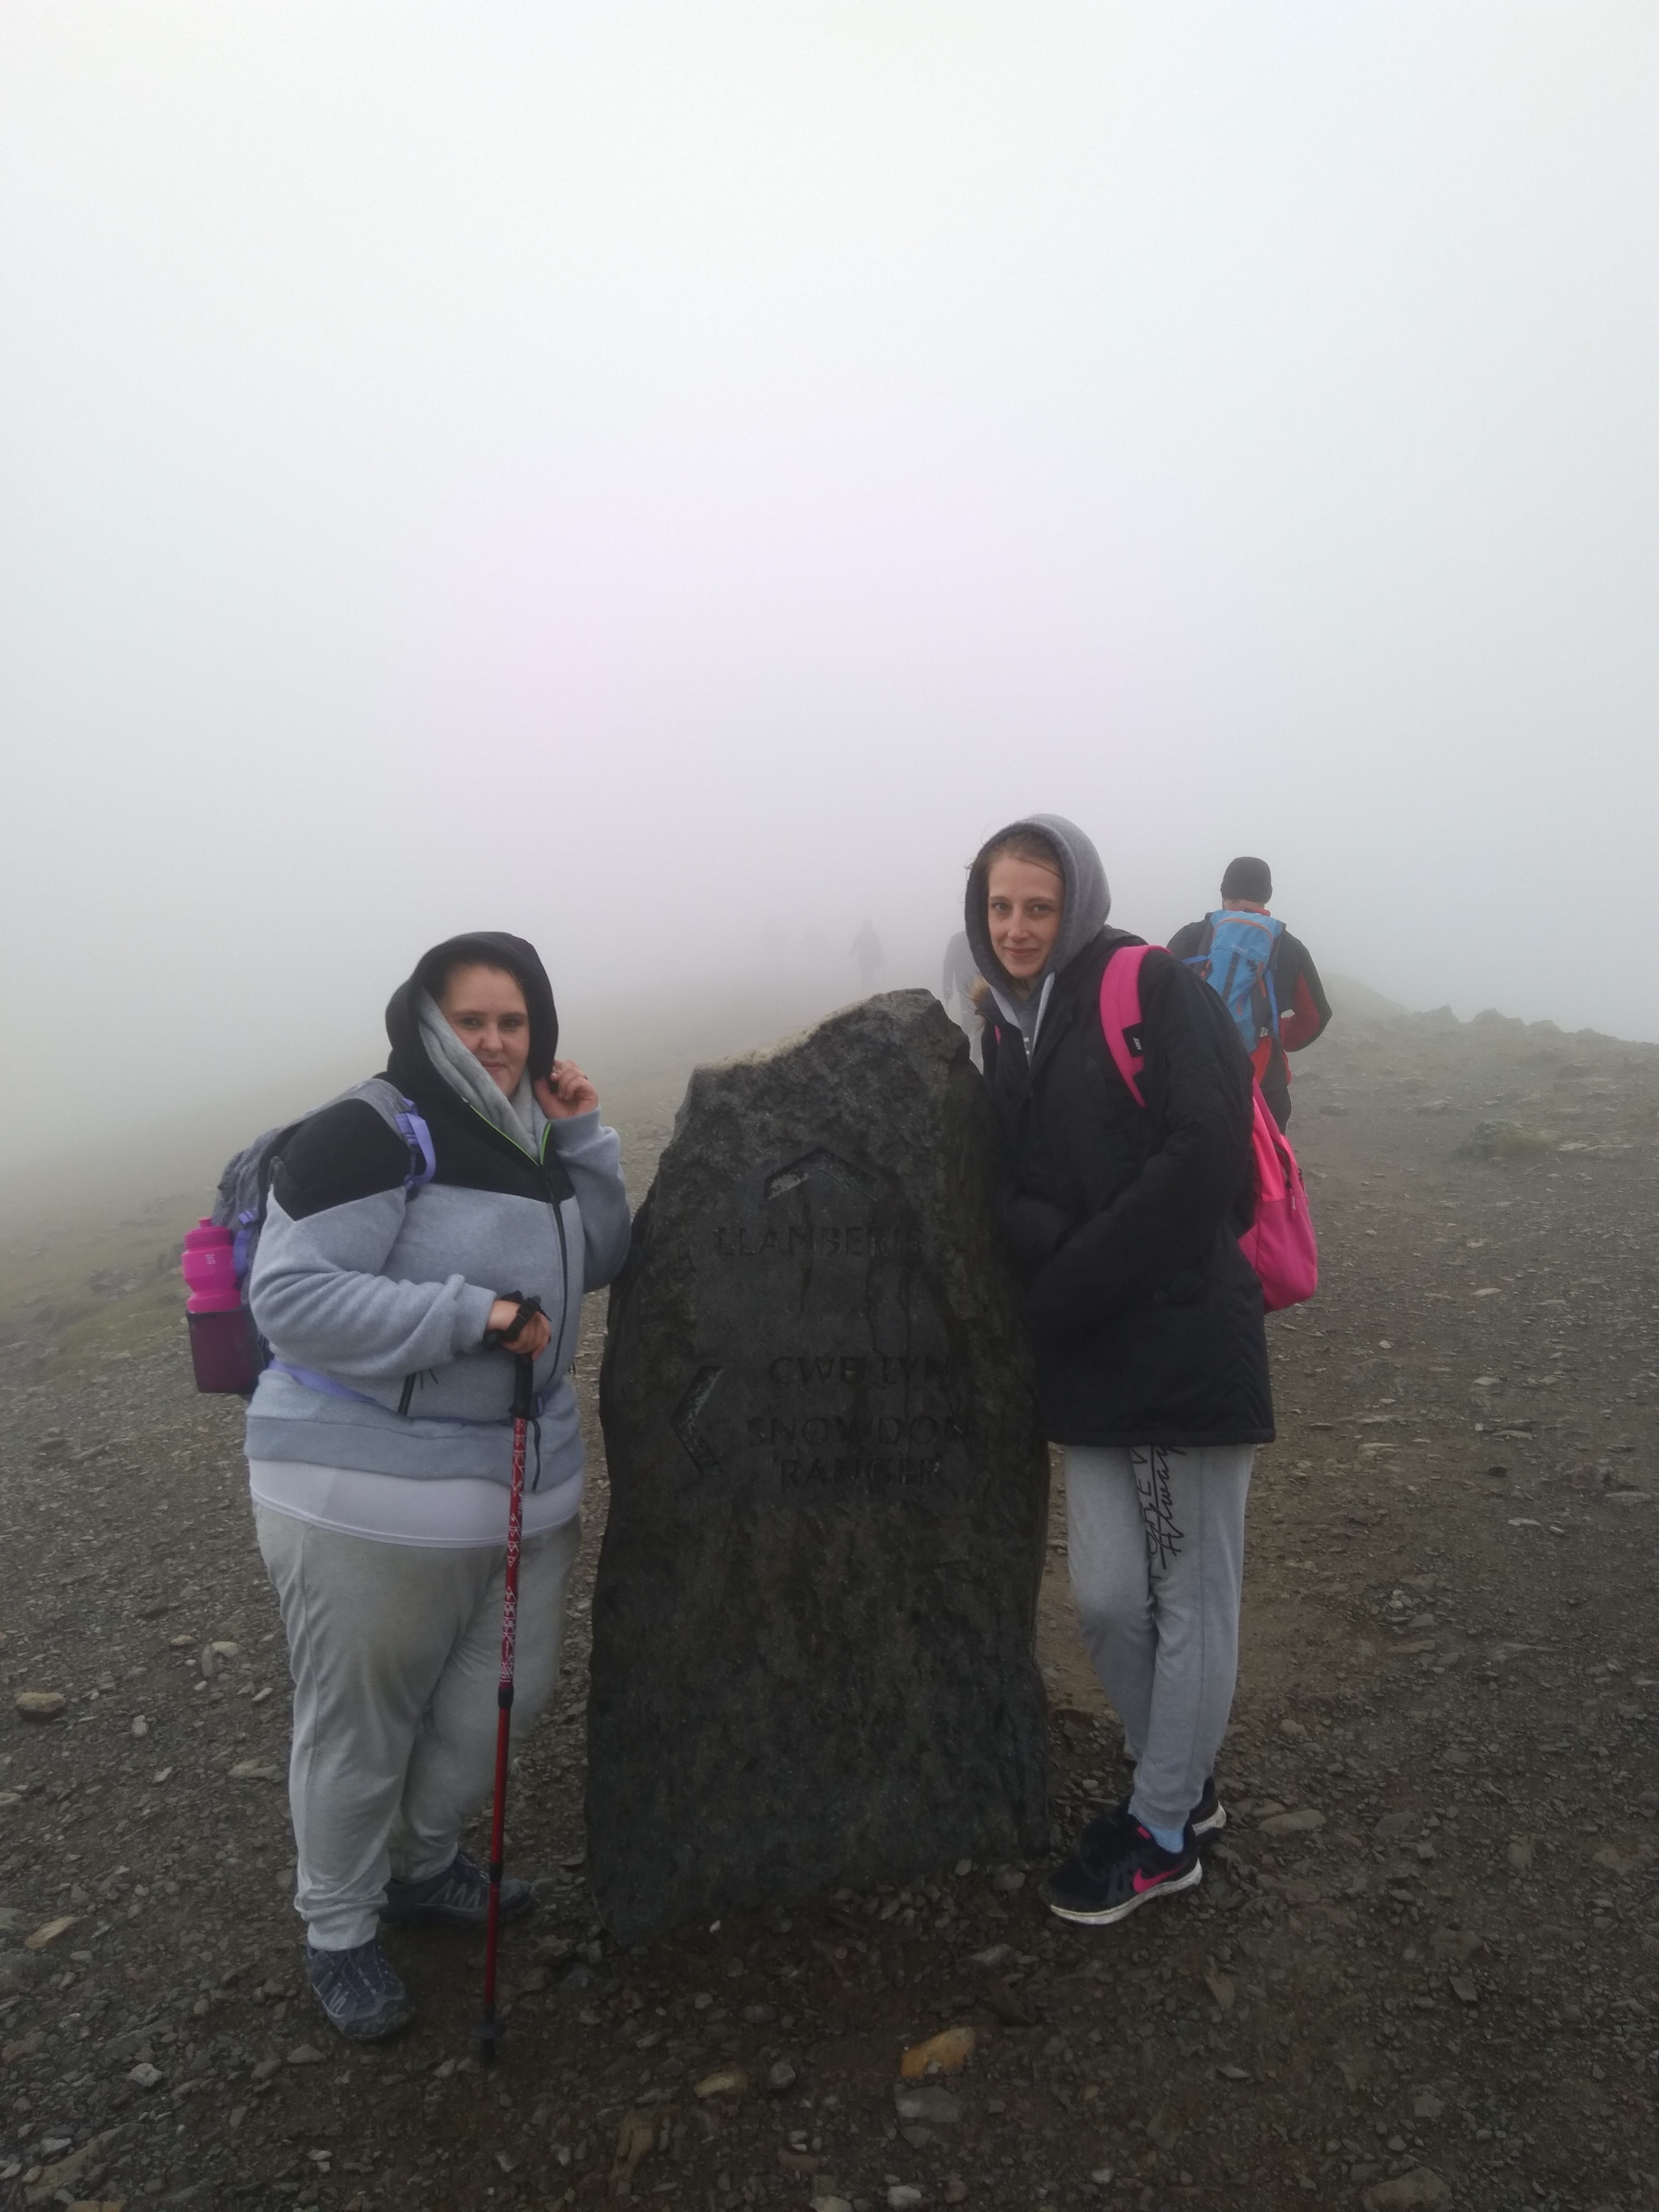 Staff climb Mt Snowdon for families living with dementia